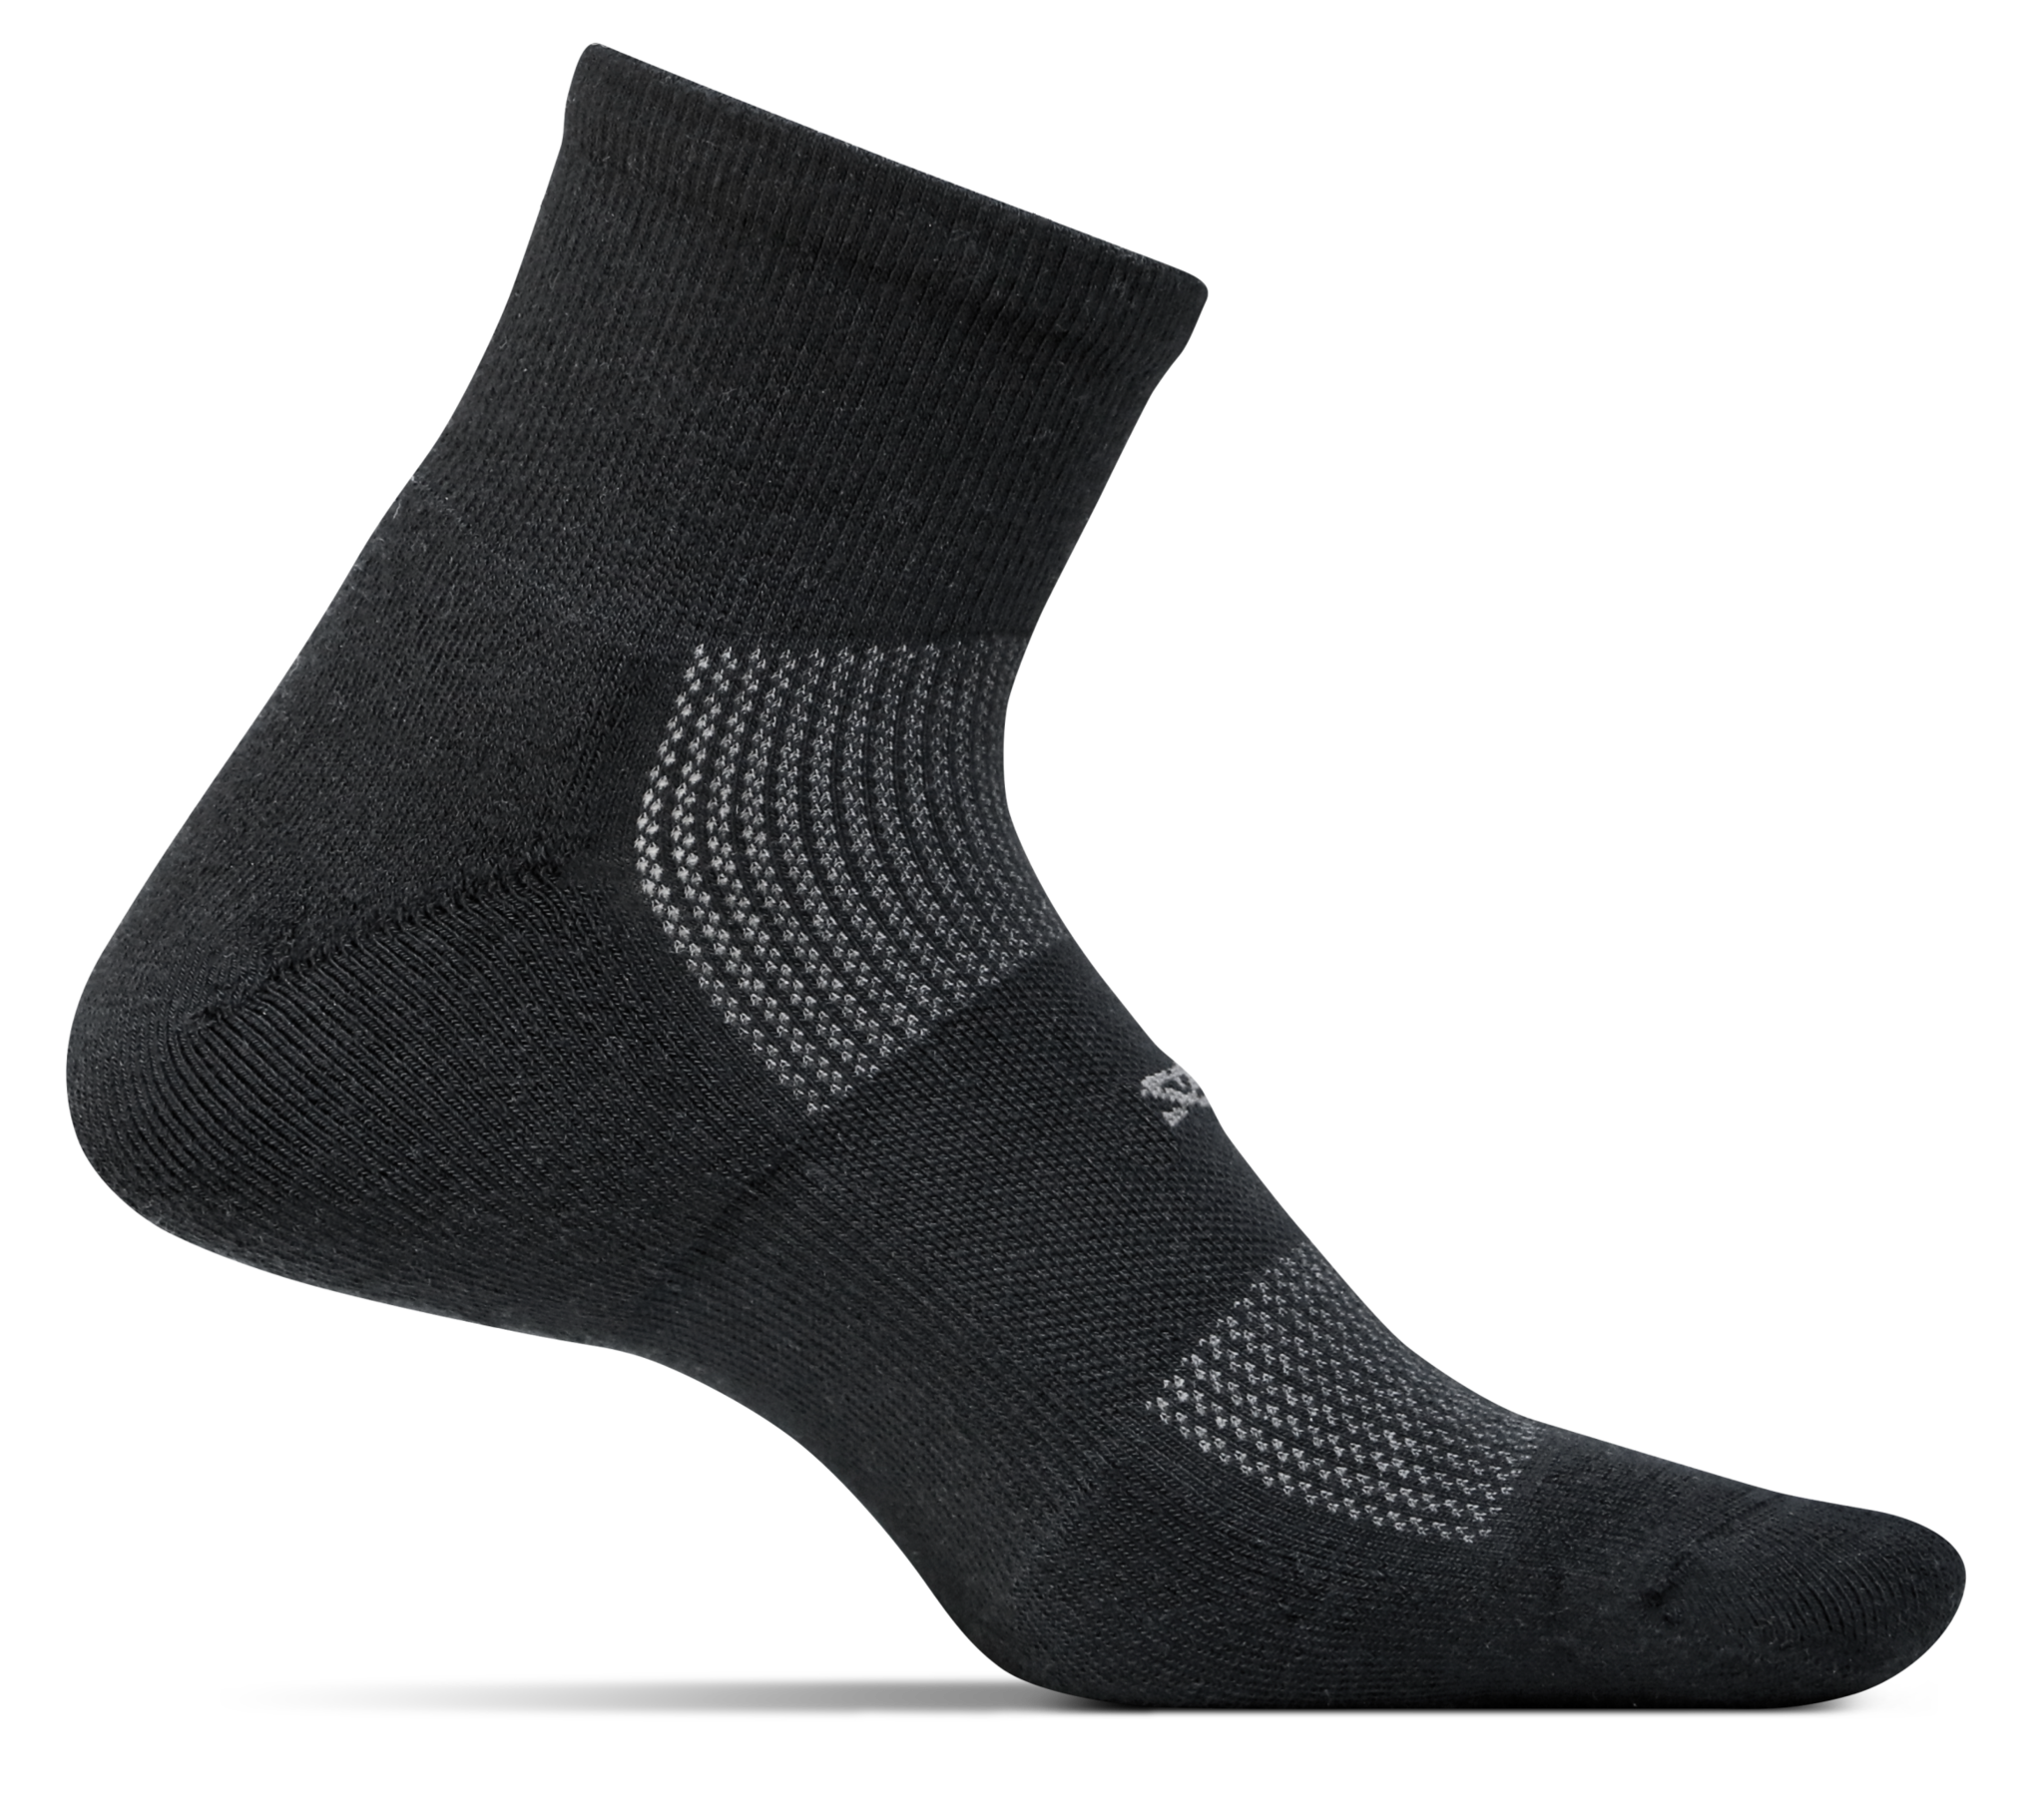 Medial view of the Feetures High Performance cushion quarter sock in the color black